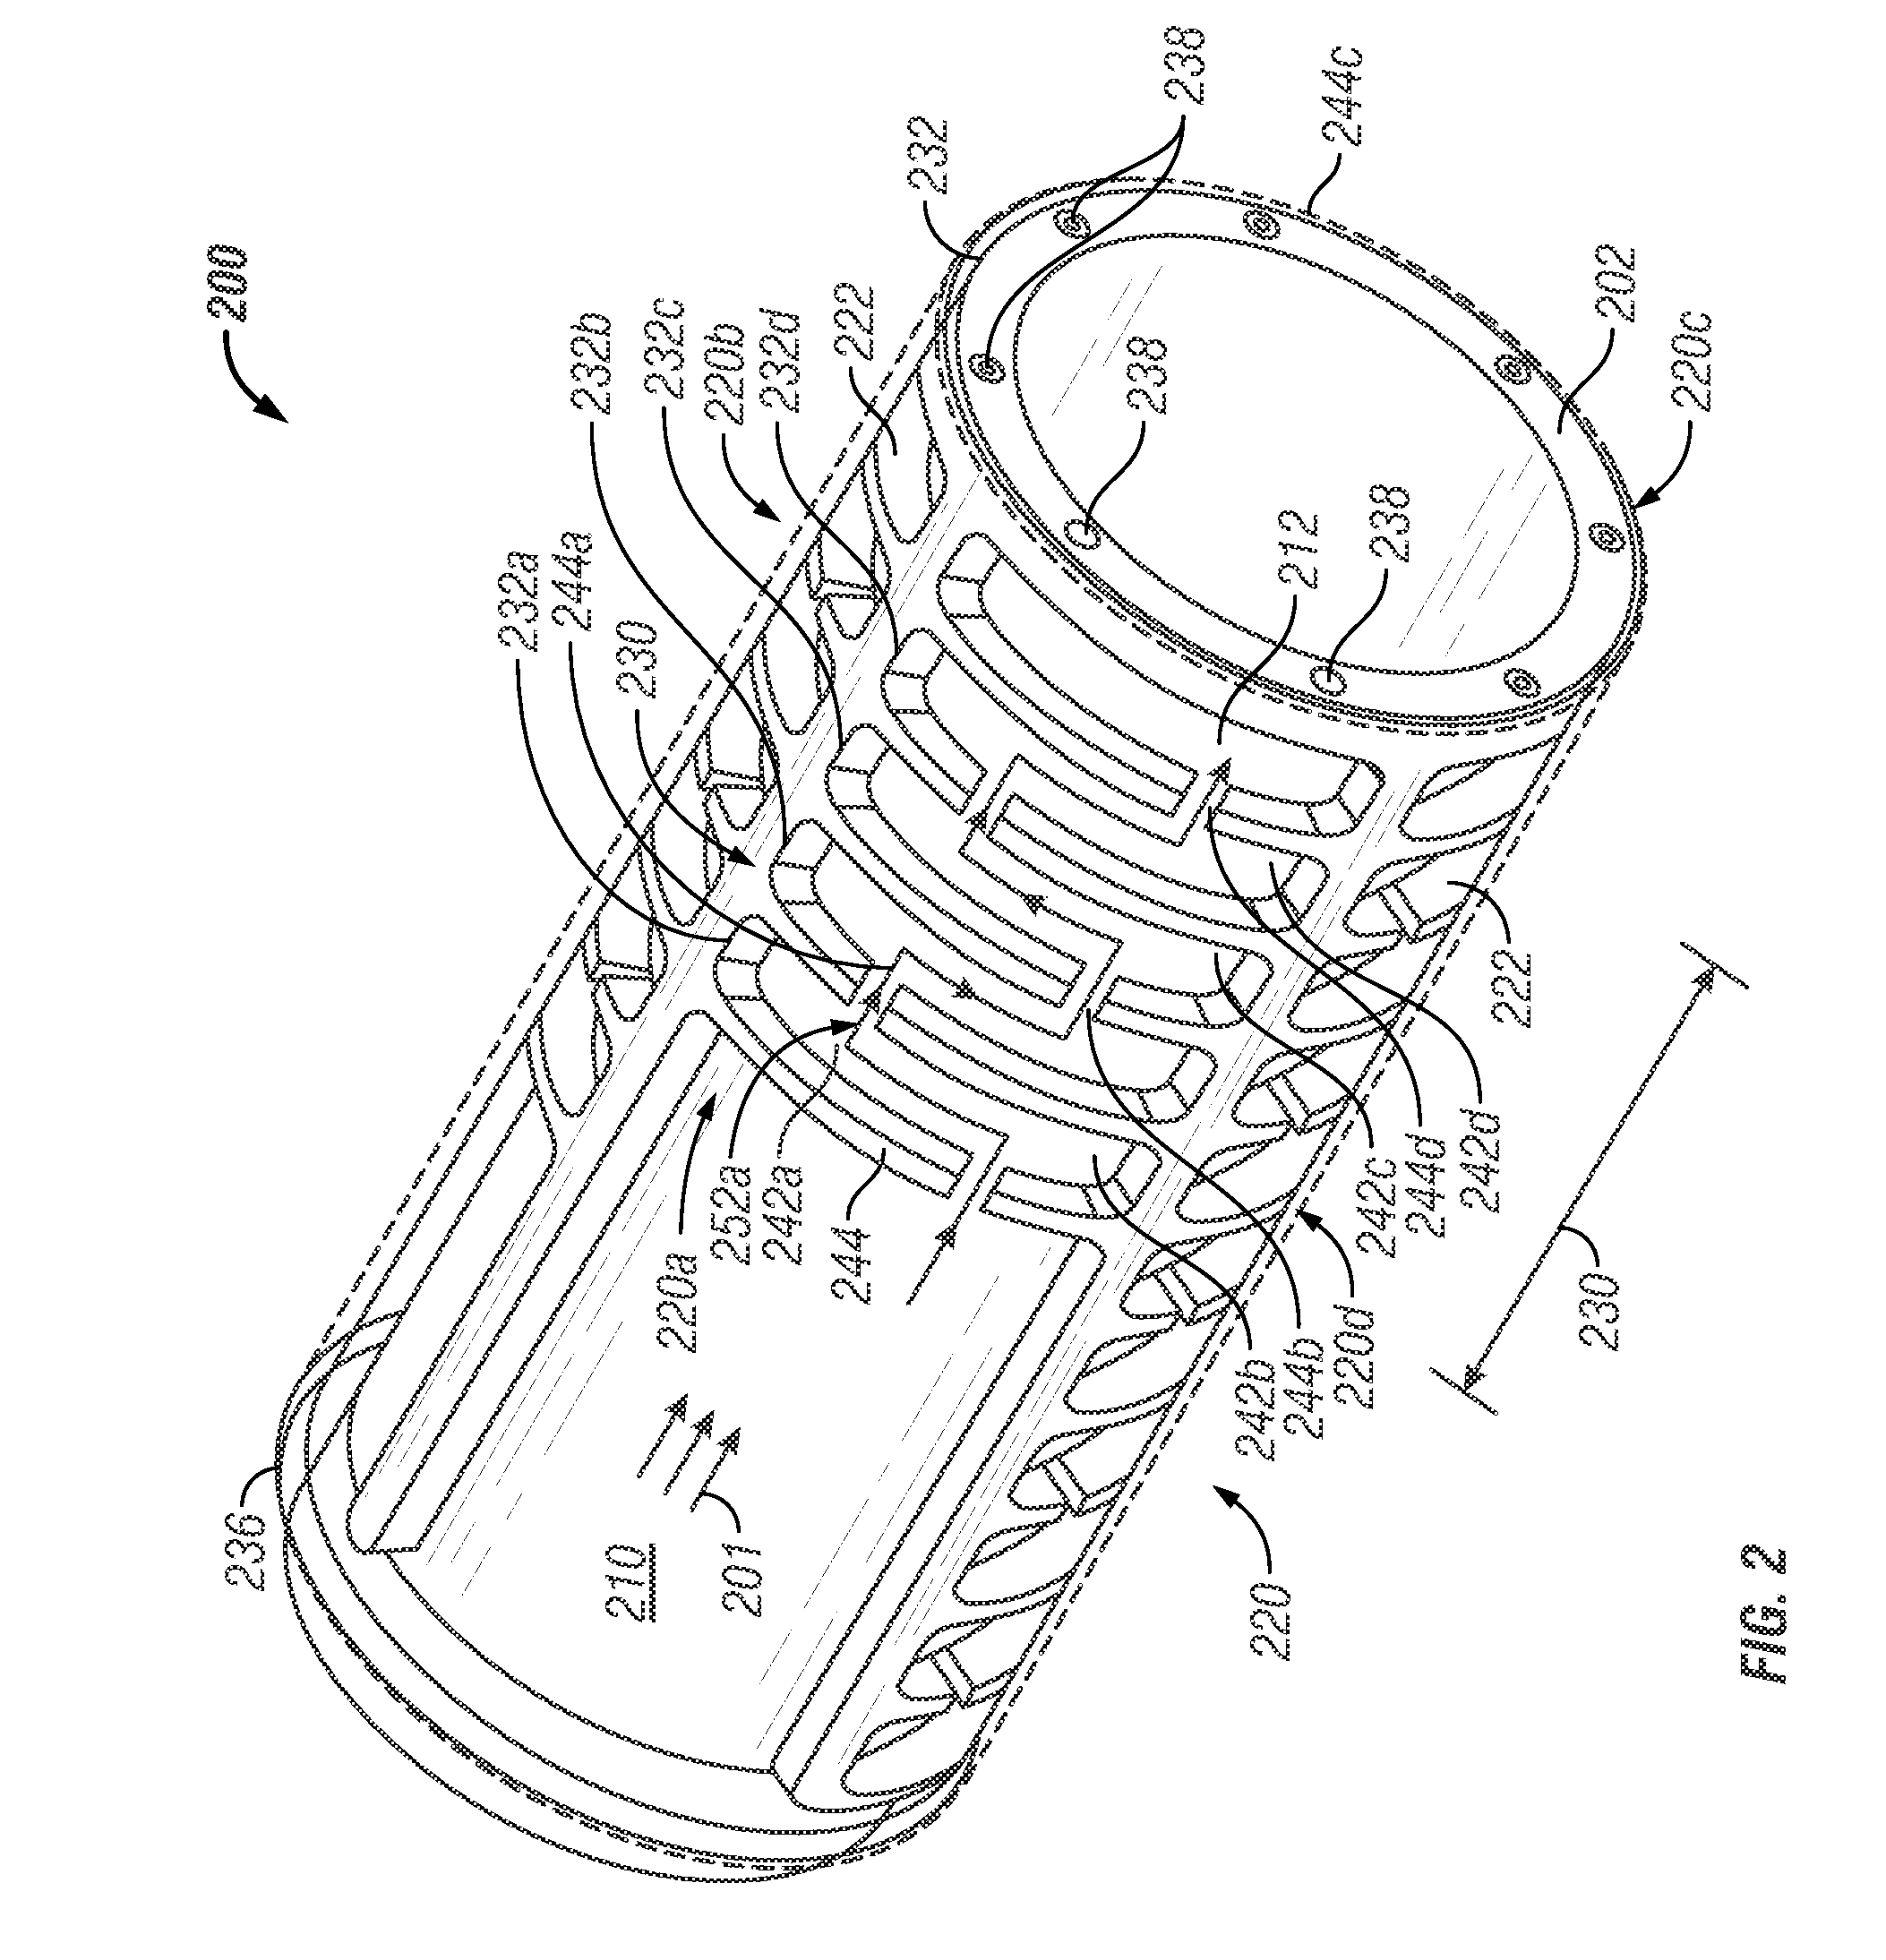 Downhole-Adjustable Flow Control Device for Controlling Flow of a Fluid Into a Wellbore